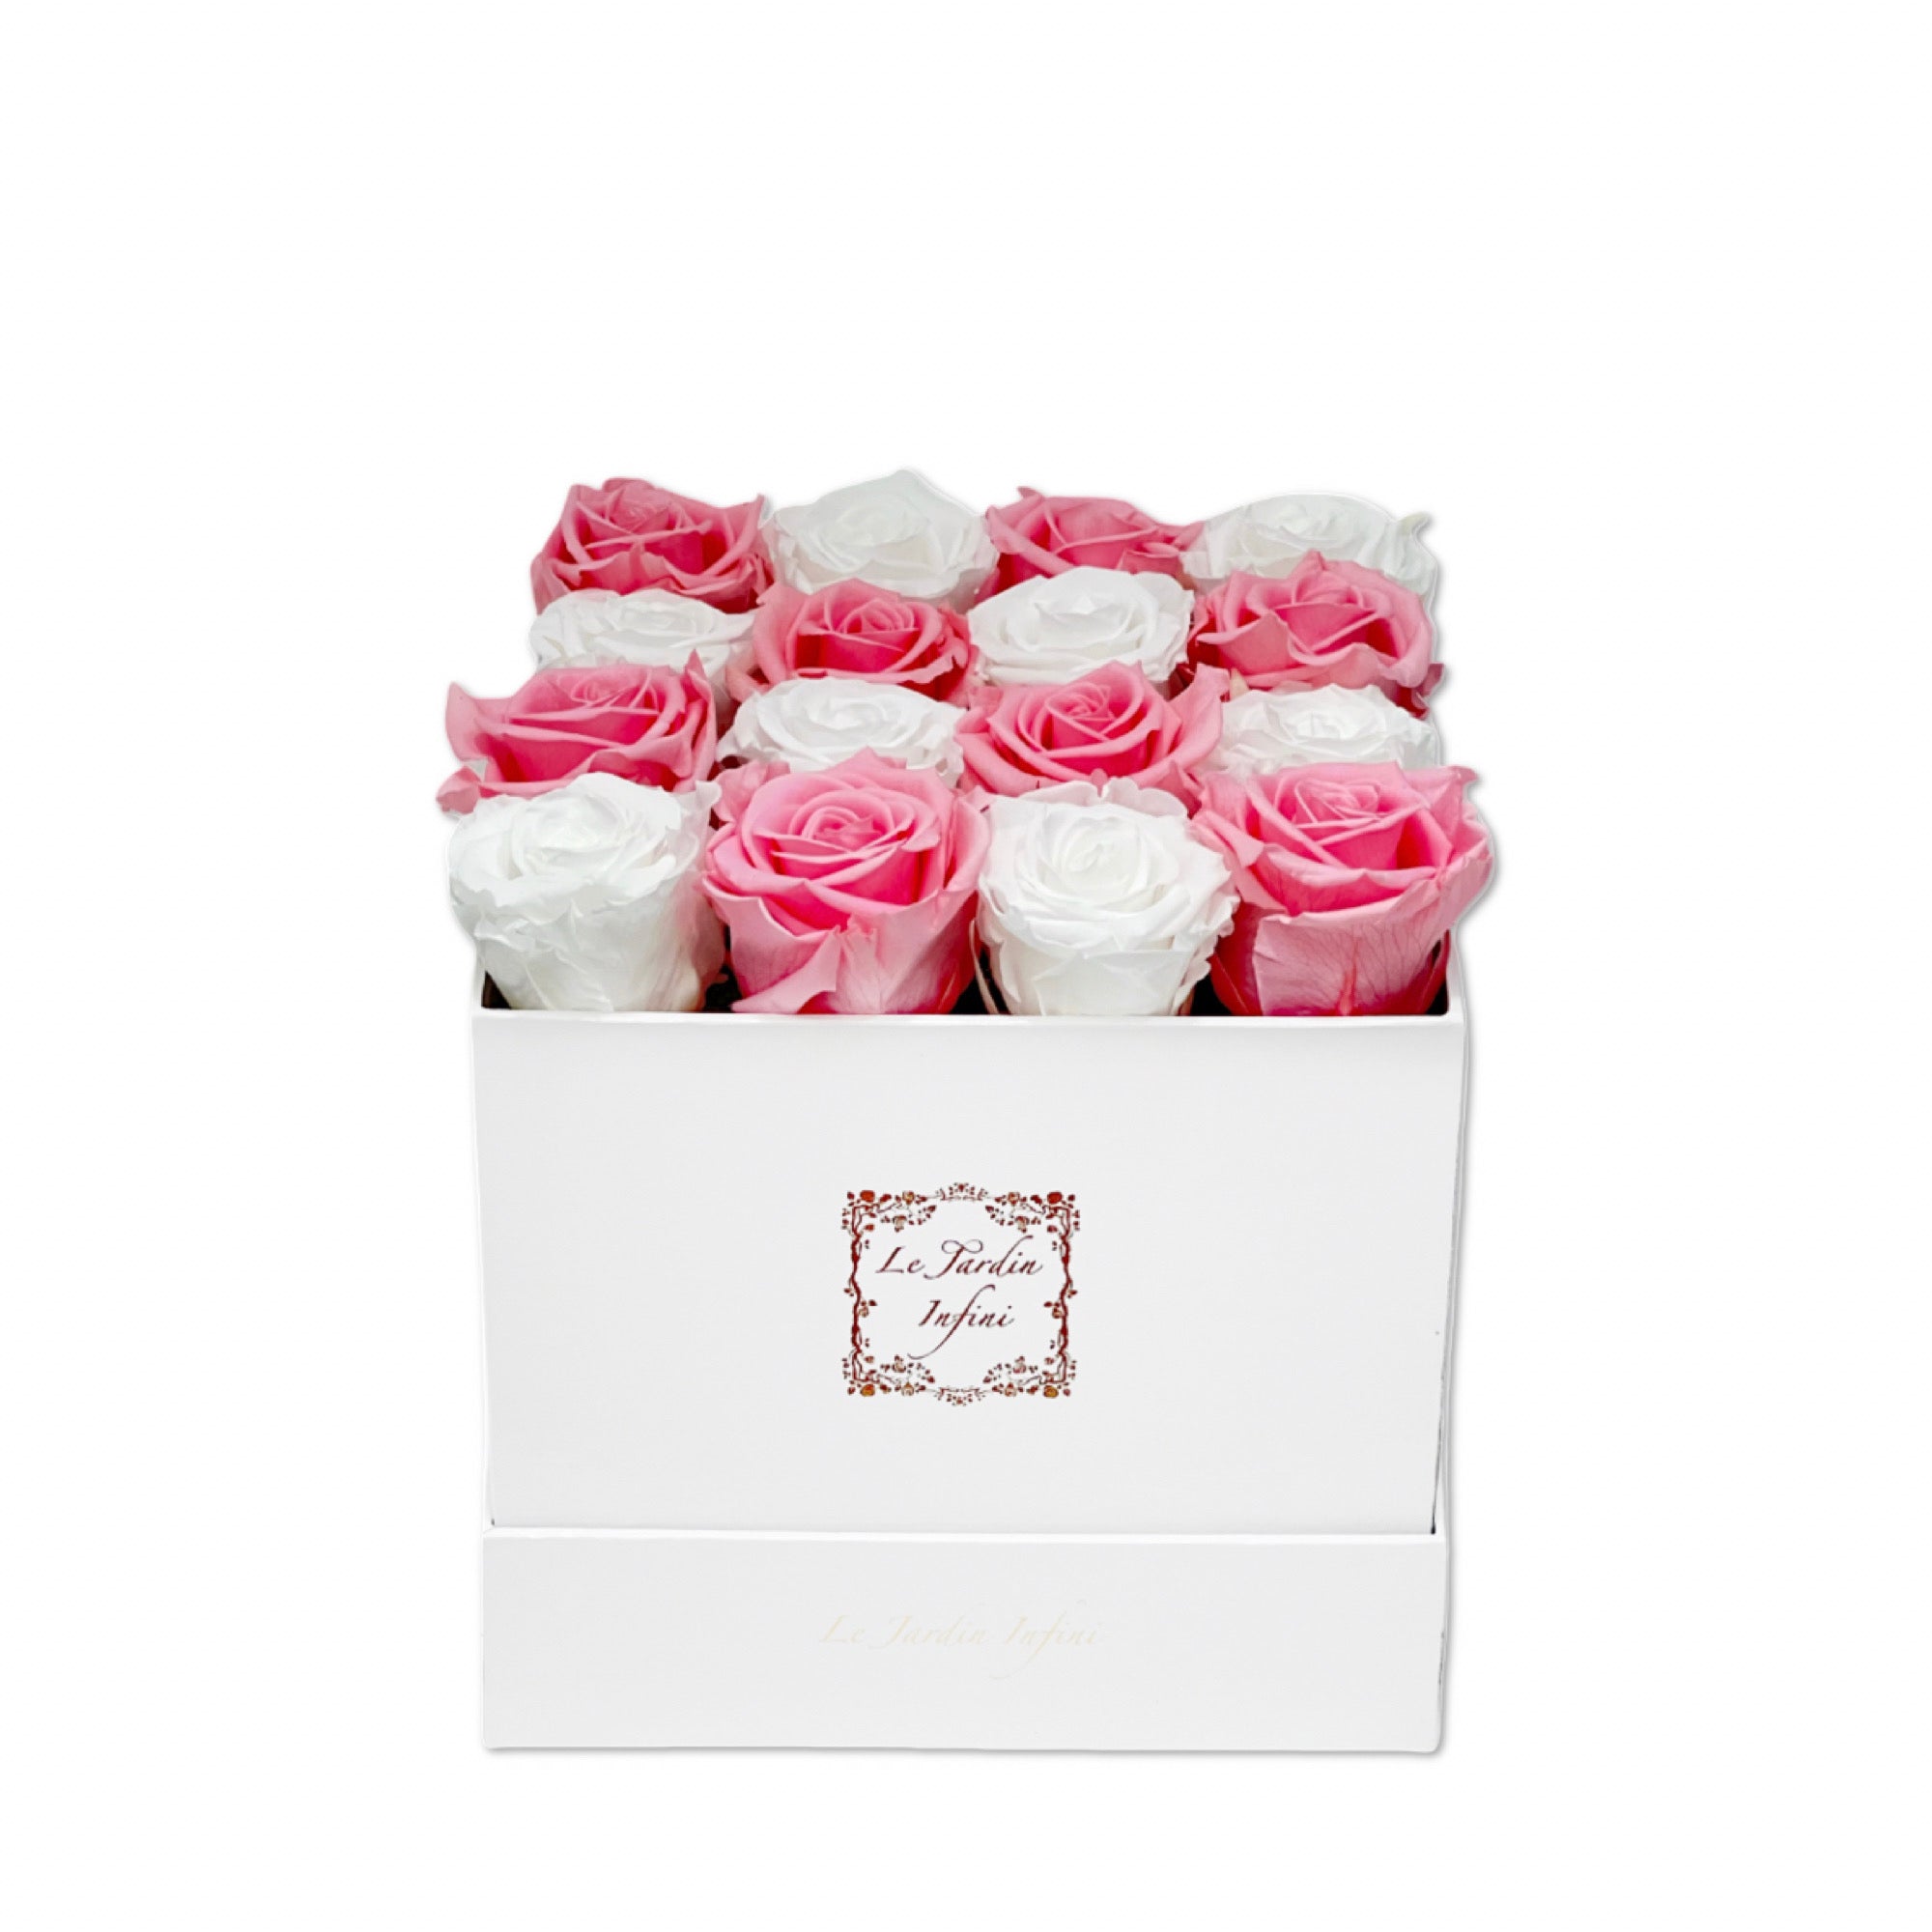 16 Pink & White Checker Preserved Roses - Luxury Square Shiny Gold Box